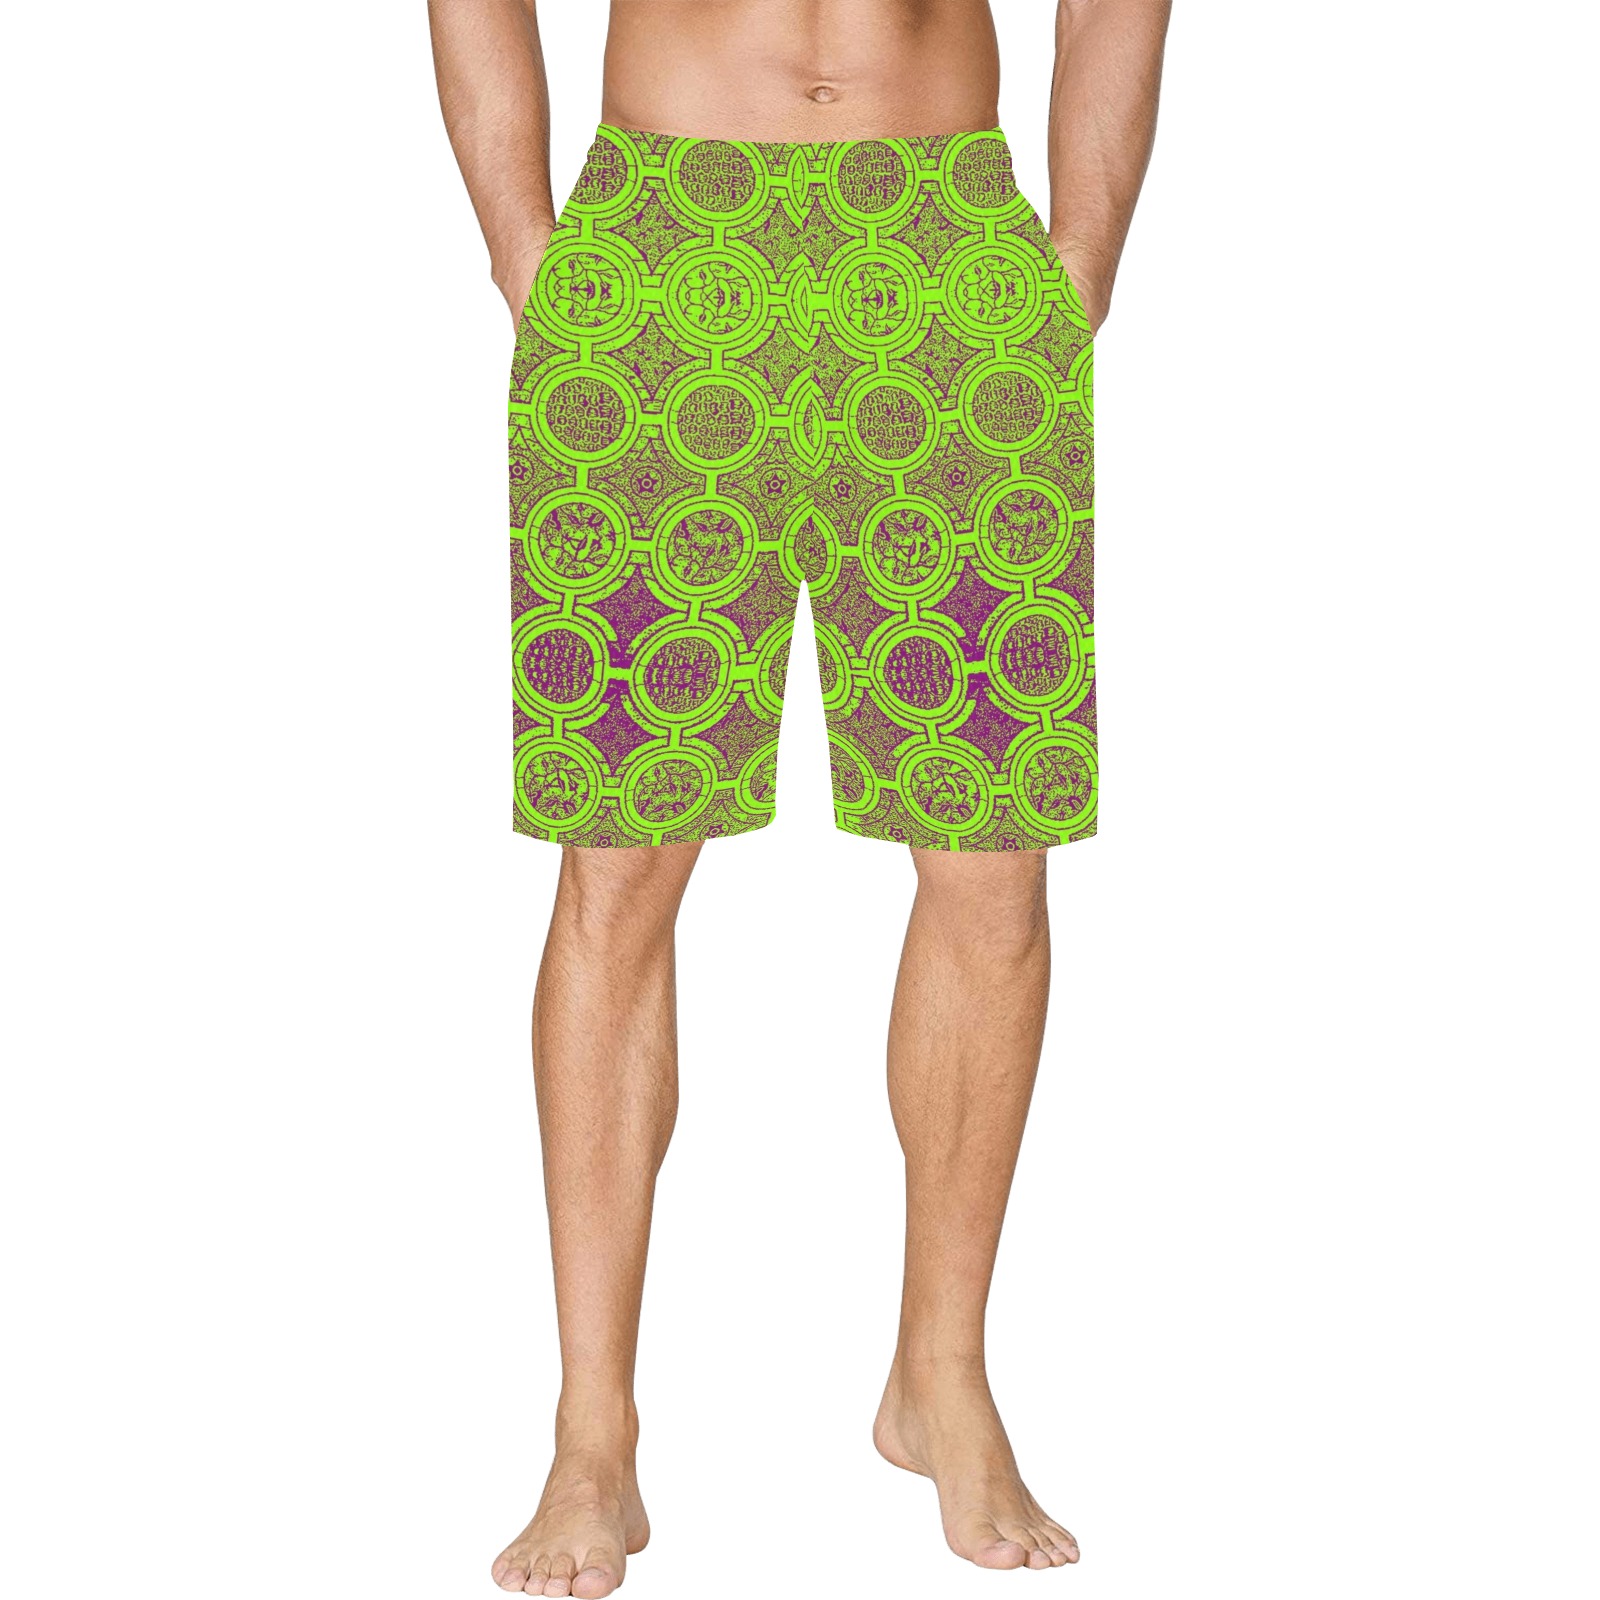 AFRICAN PRINT PATTERN 2 All Over Print Basketball Shorts with Pocket